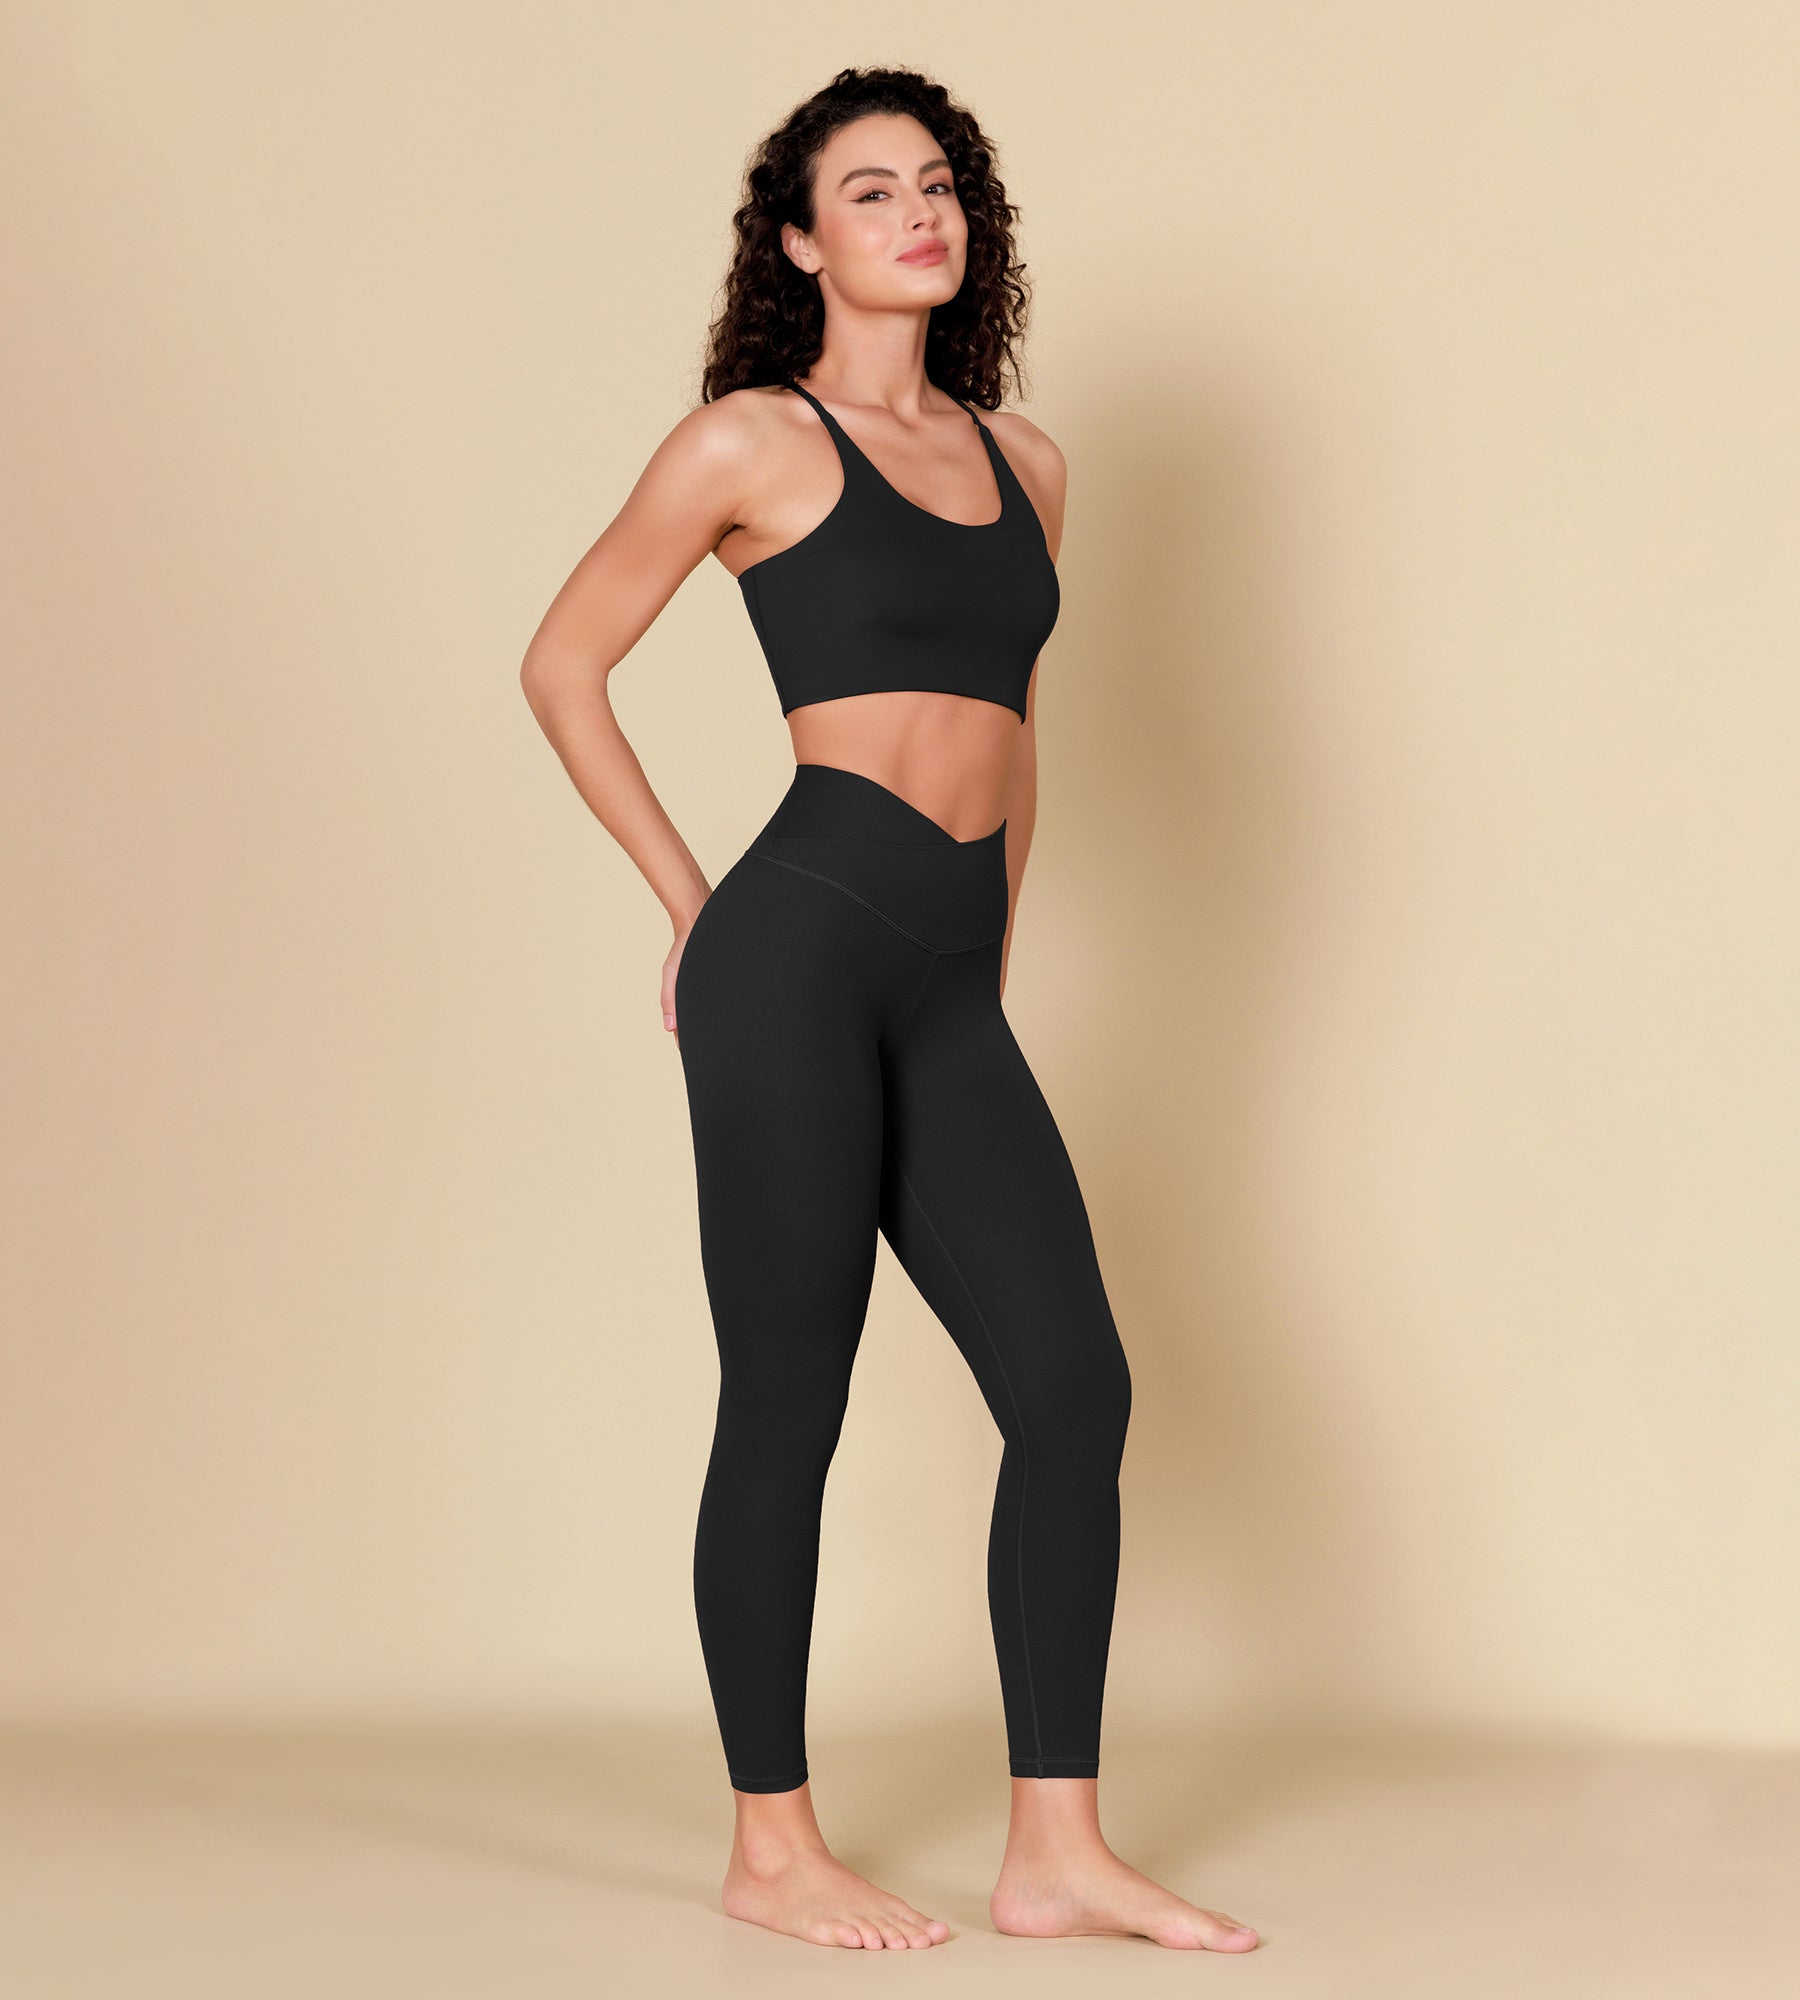 ODCLOUD Crossover 7/8 Leggings with Back Pocket - ododos